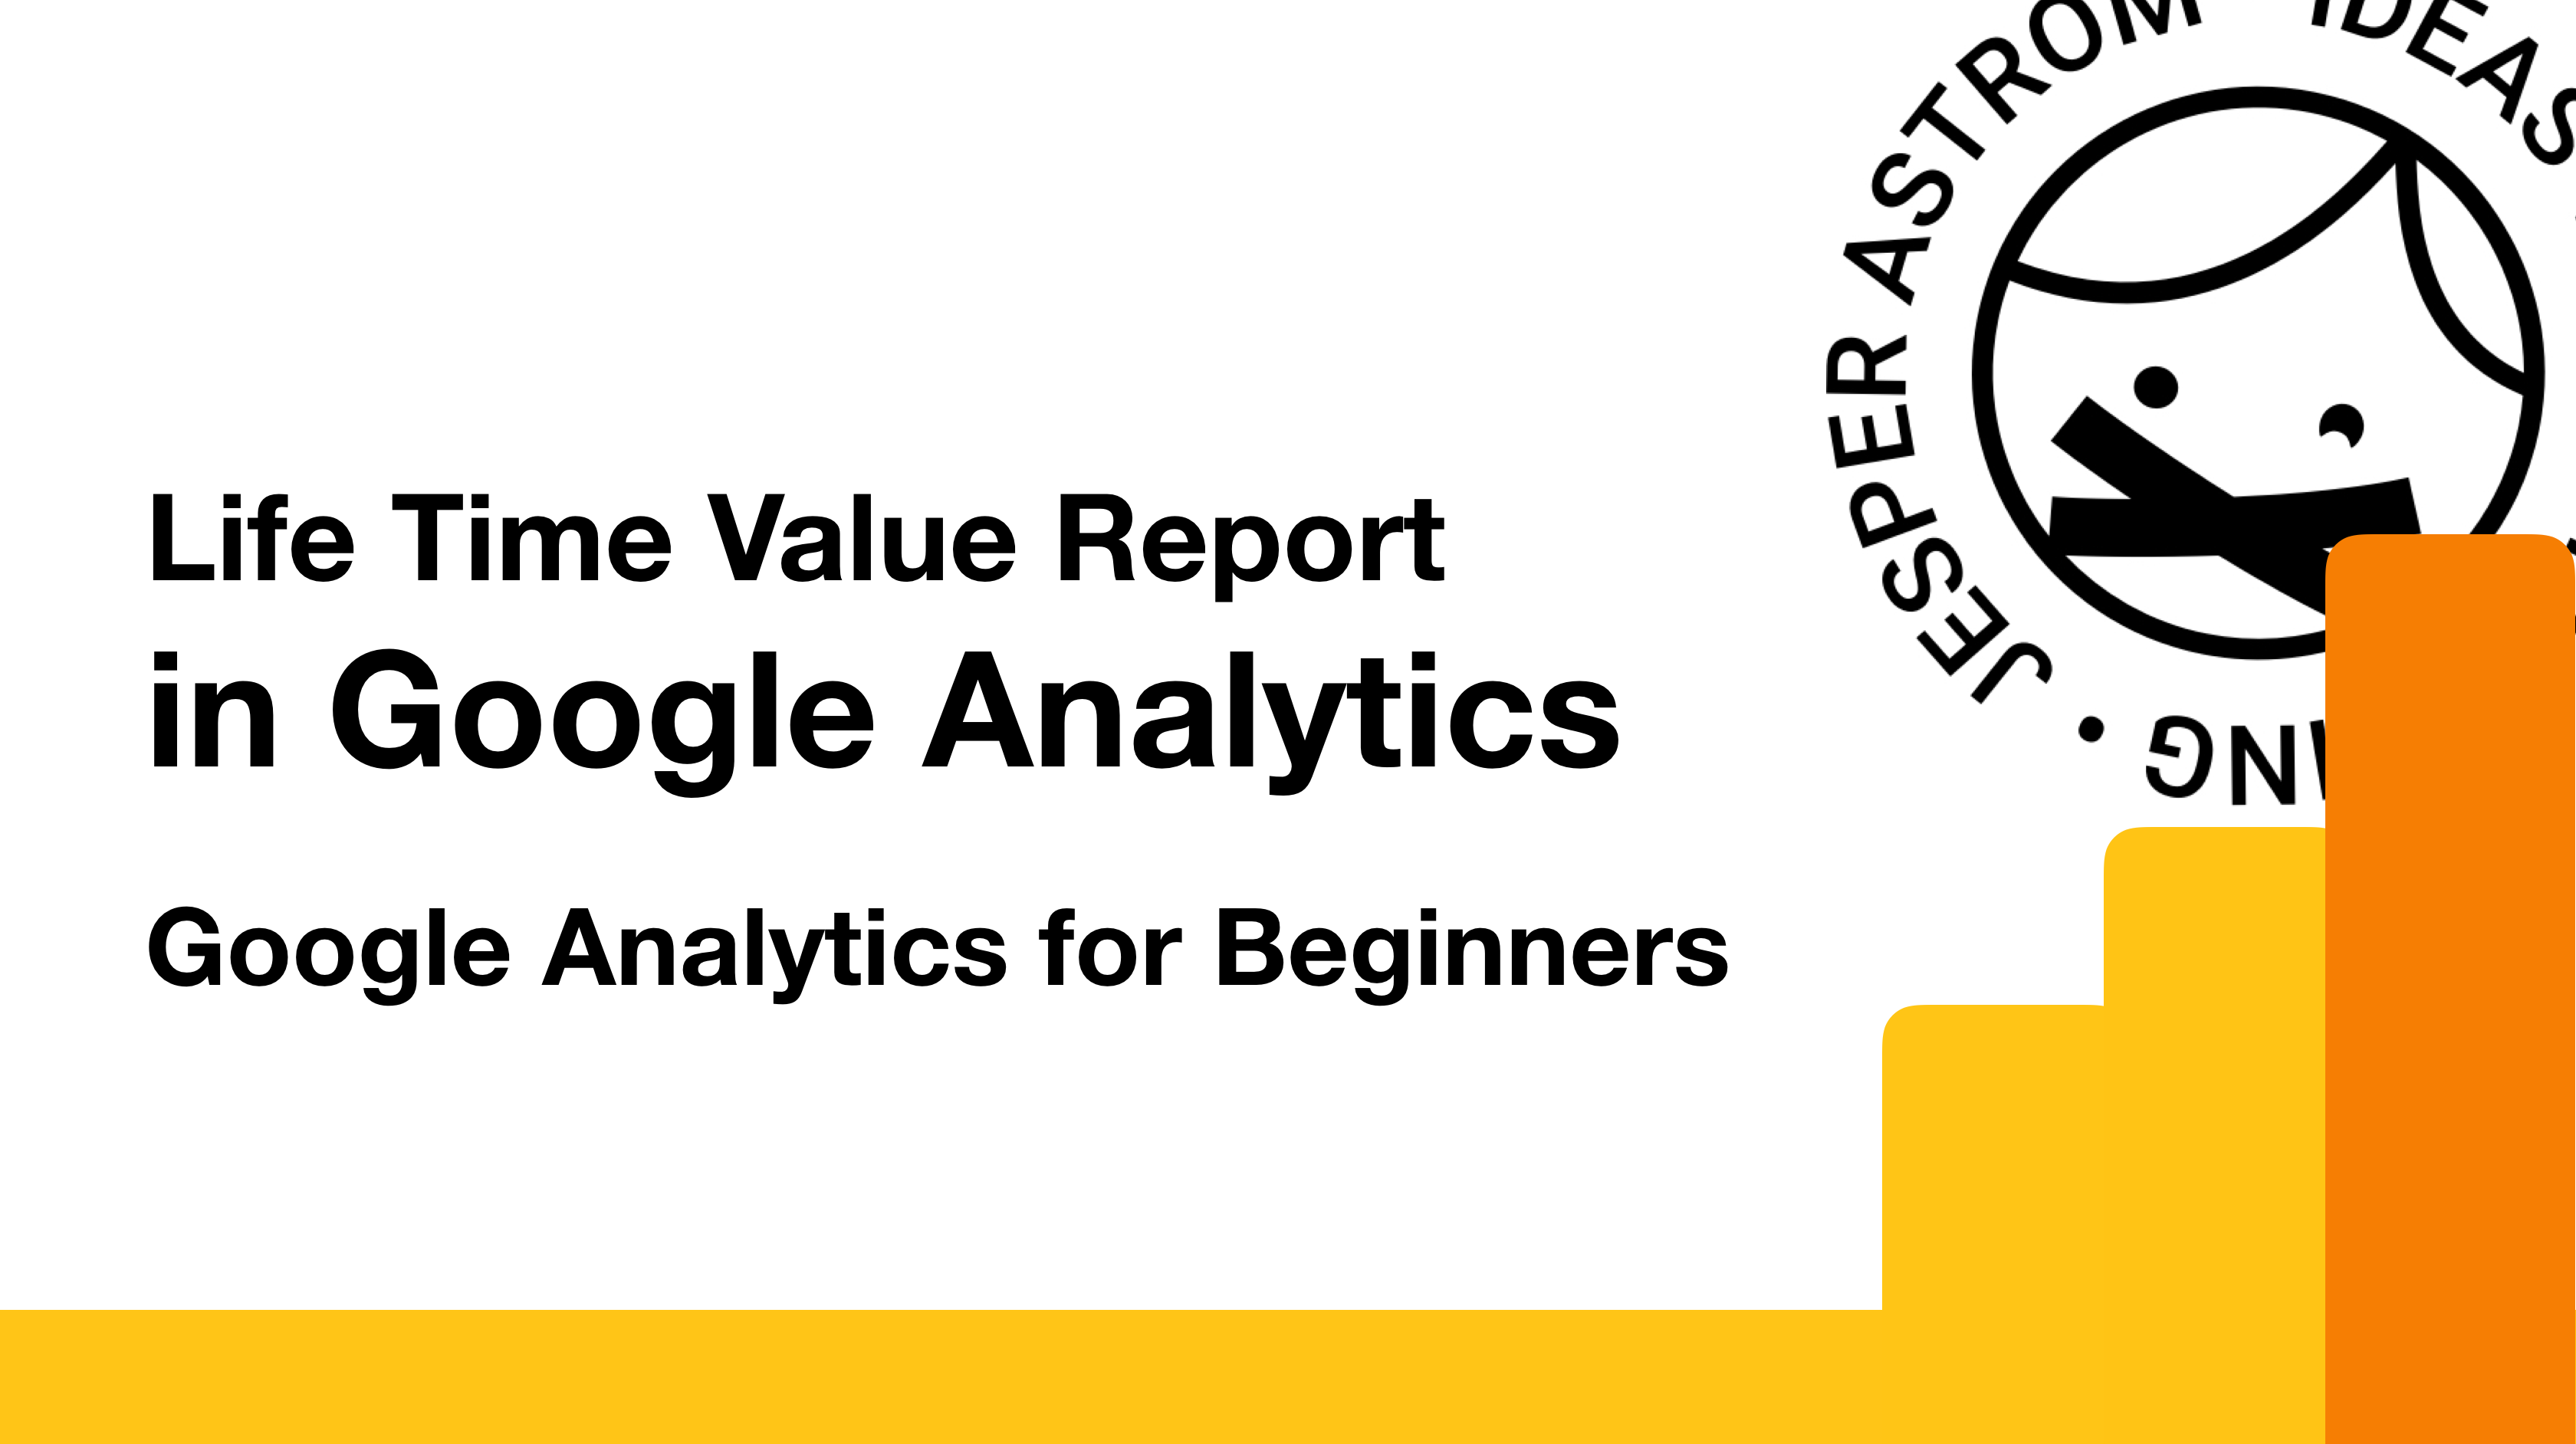 Life Time Value Report in Google Analytics